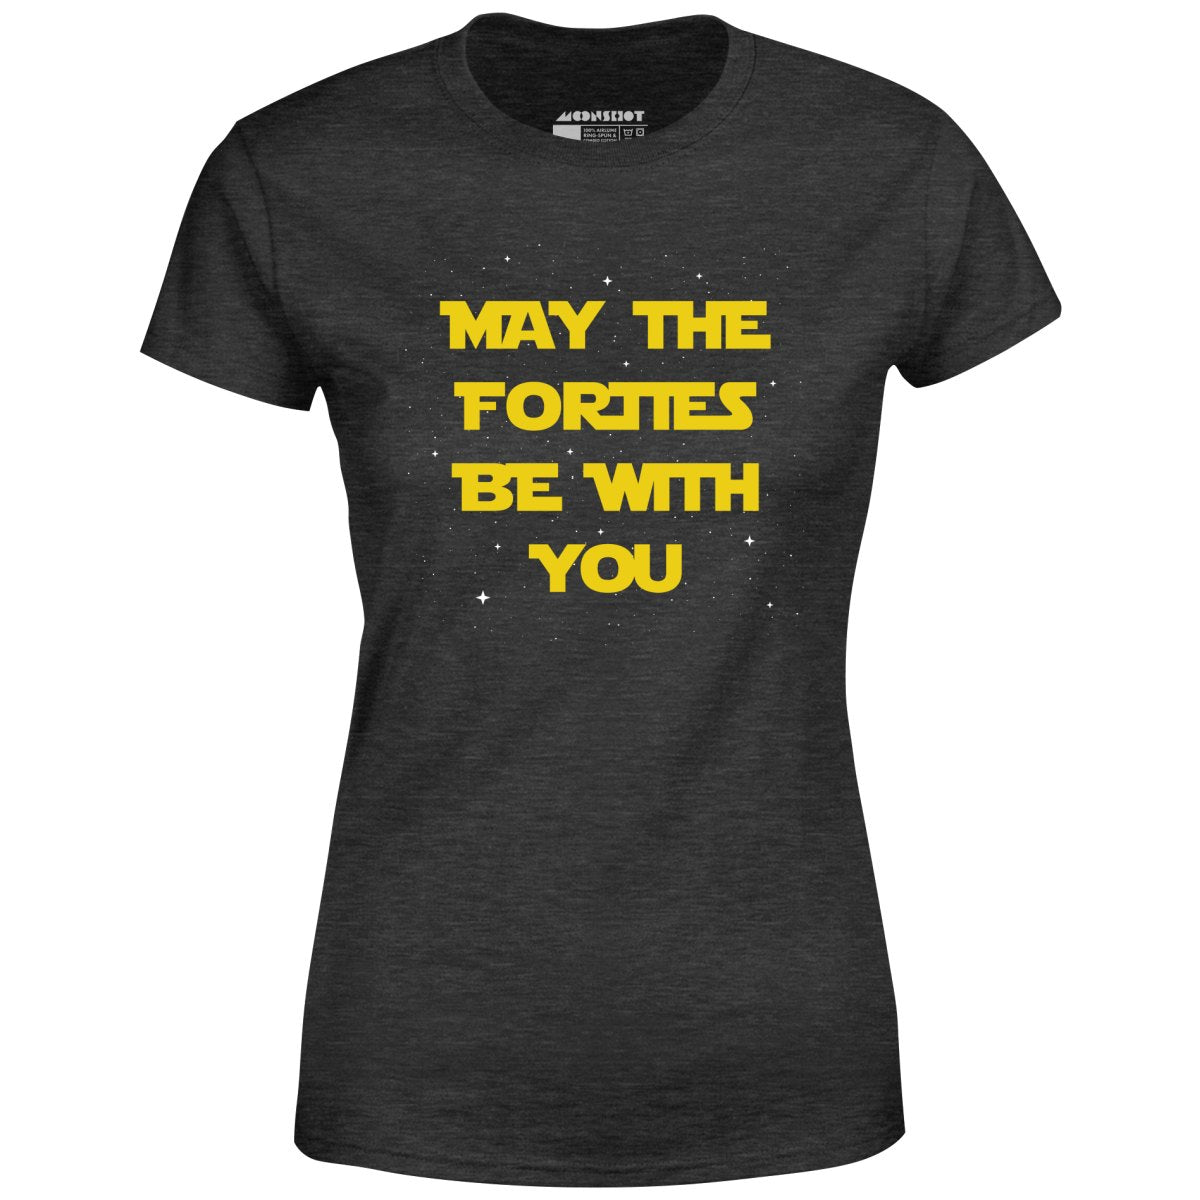 May The Forties Be With You - Women's T-Shirt